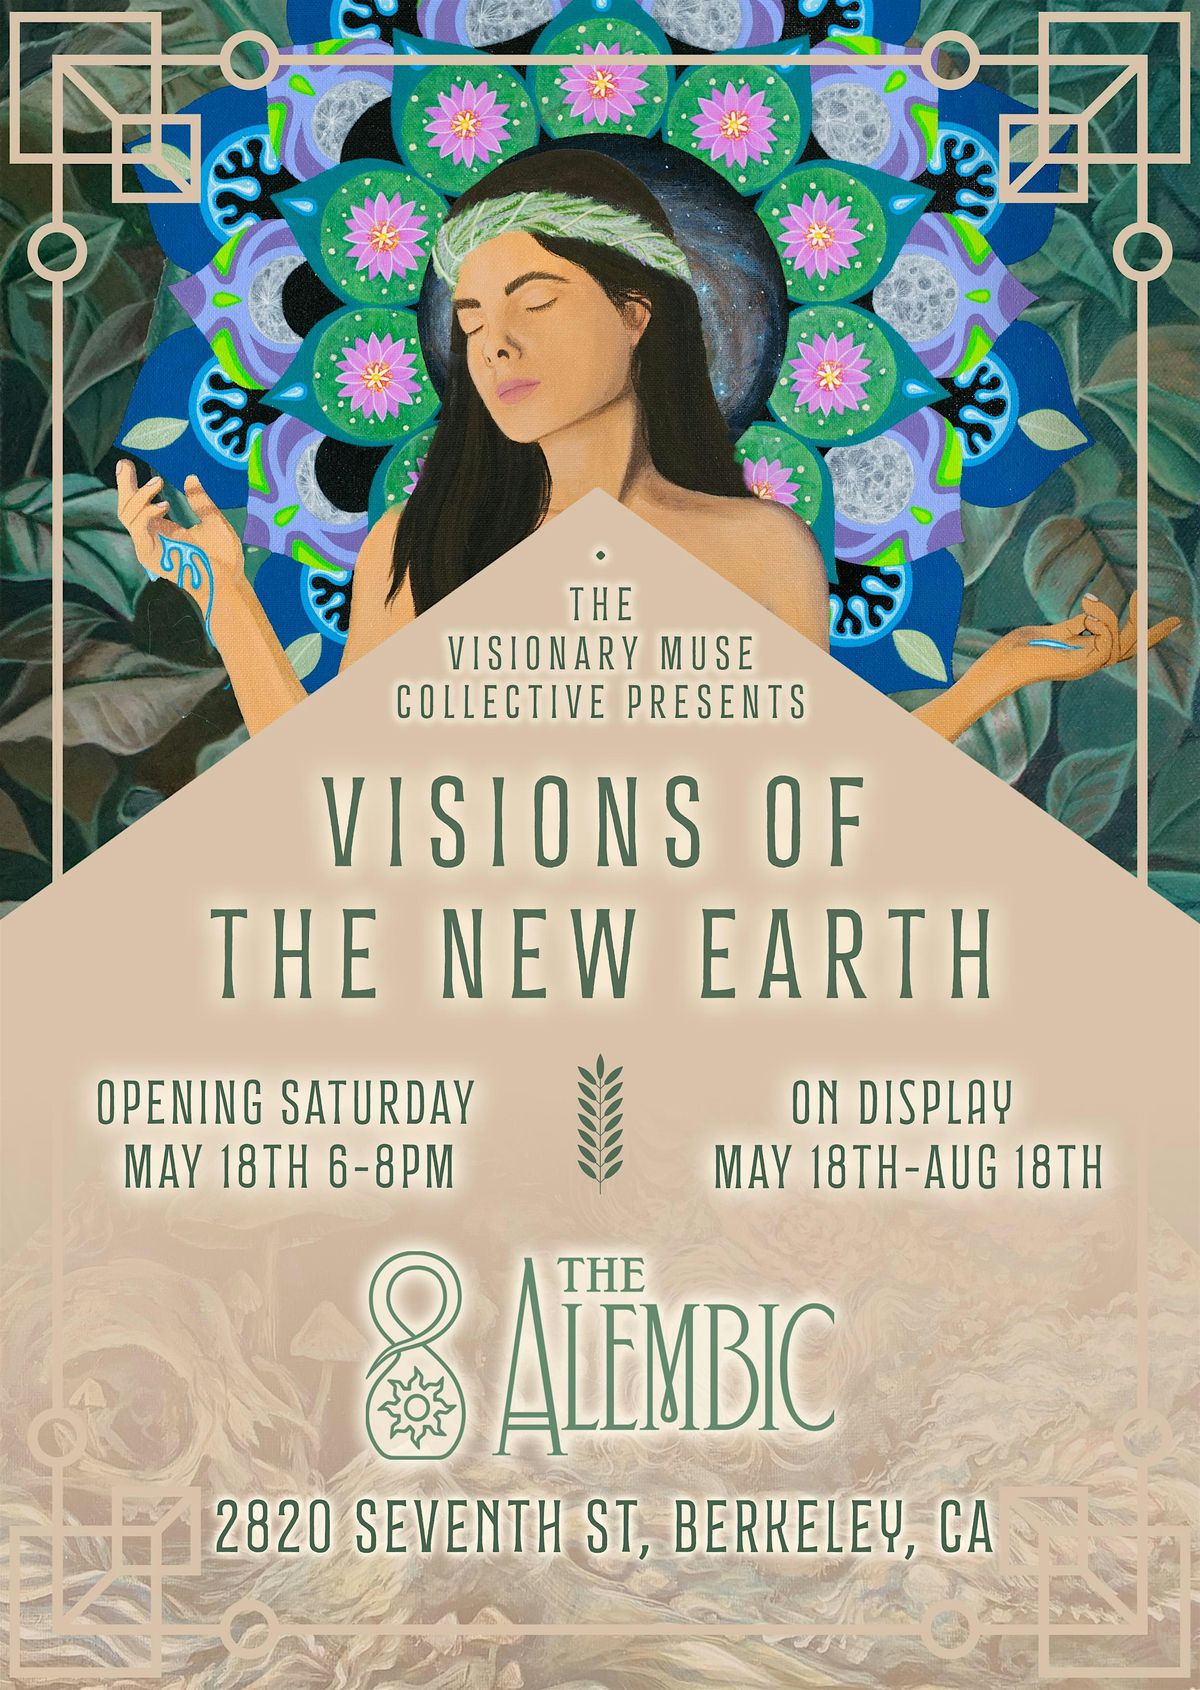 Visions of the New Earth Exhibition at Alembic